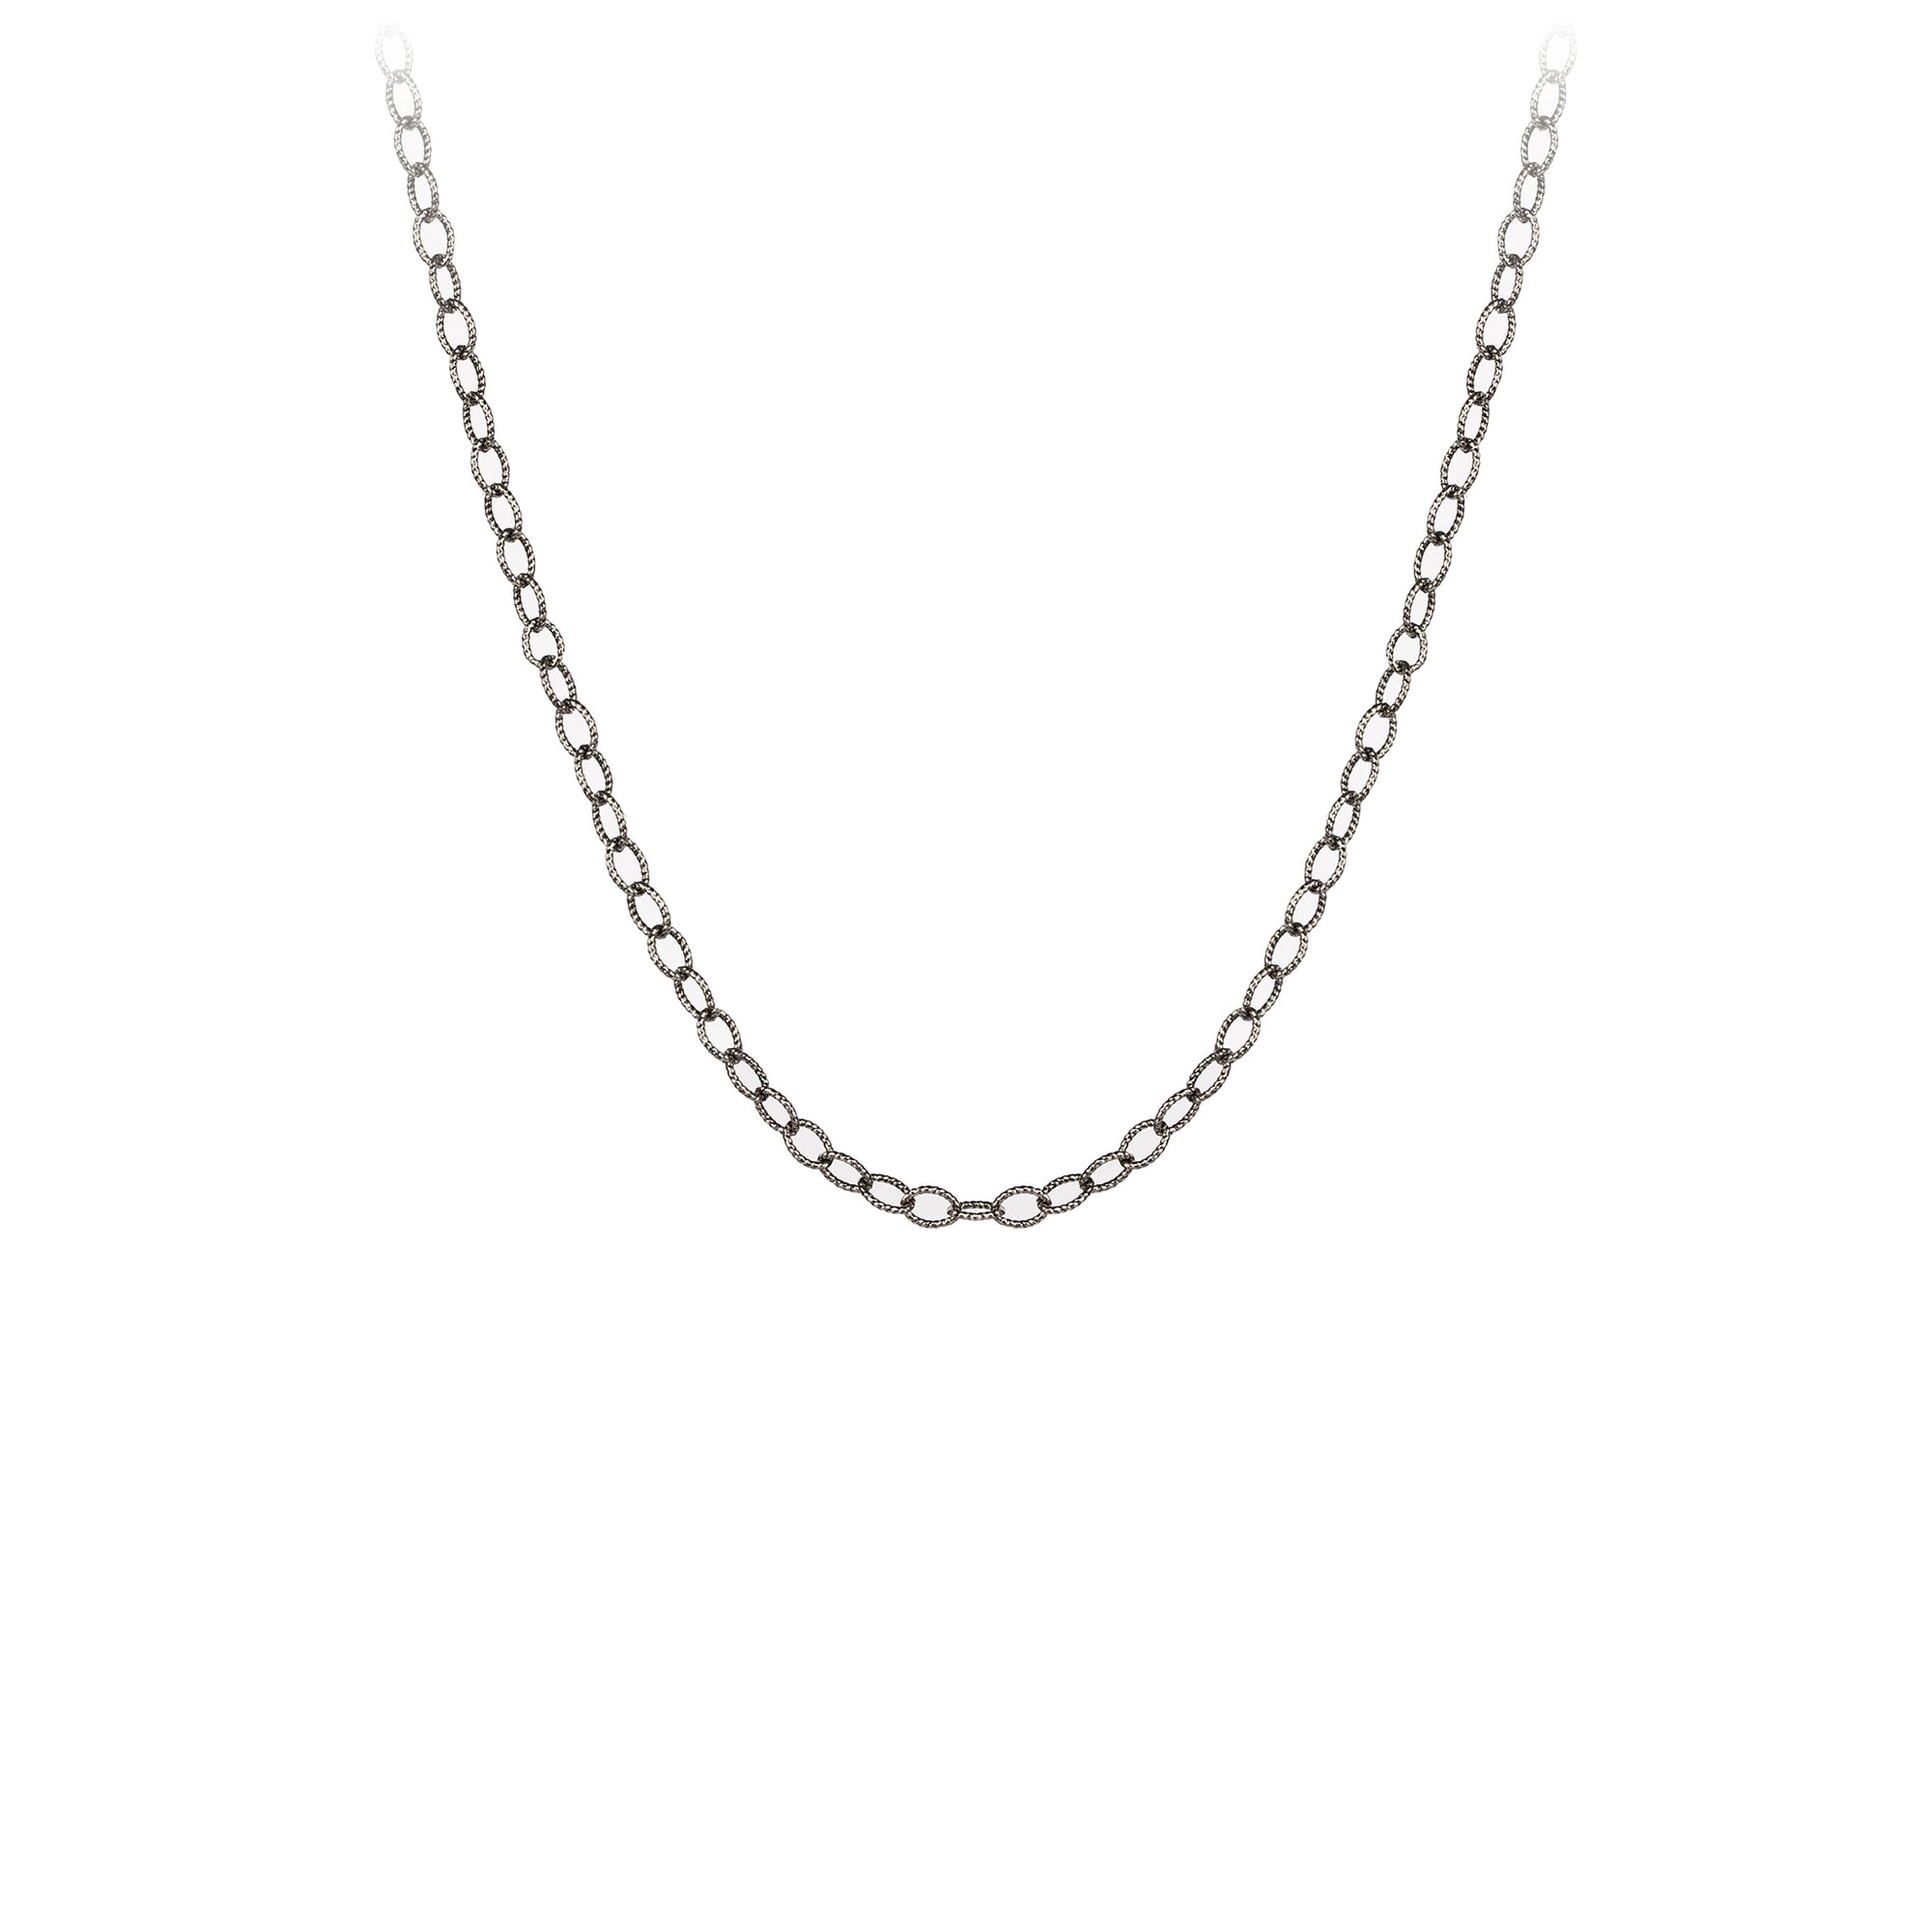 A sterling silver chain with medium twisted cable links